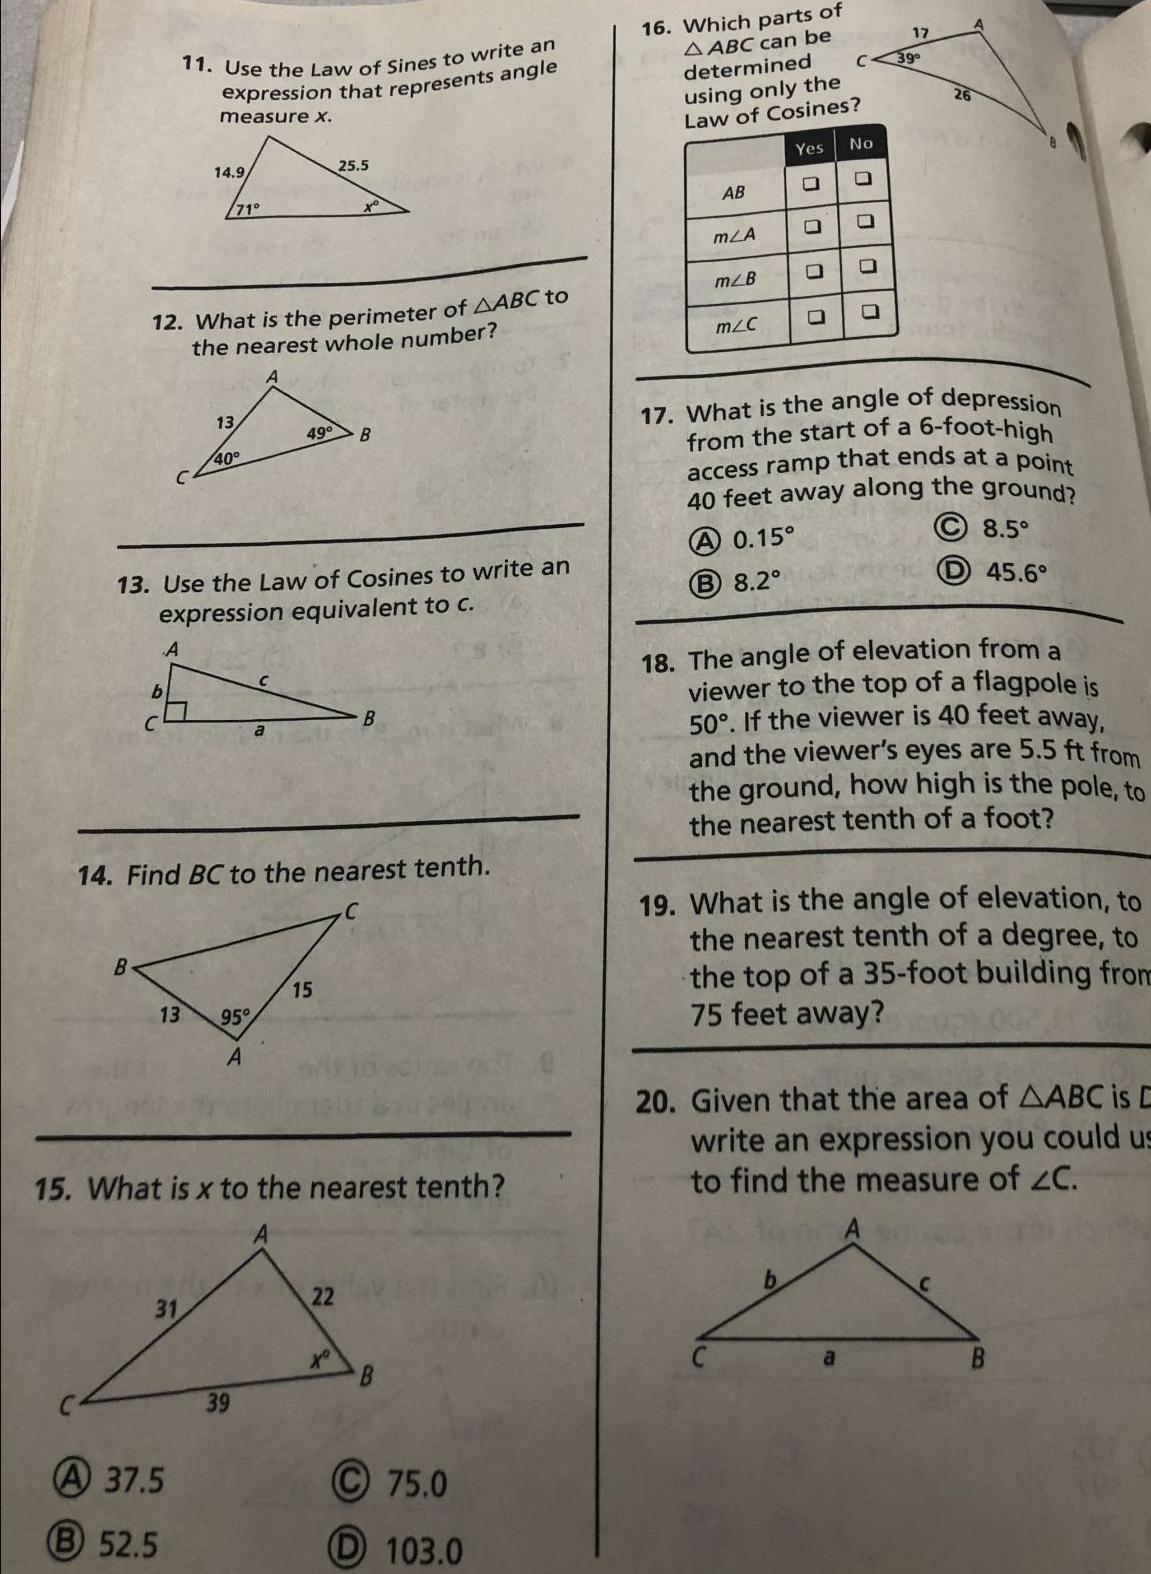 Can You Help Me With Number 14? Thank You I Am Having Trouble With It.